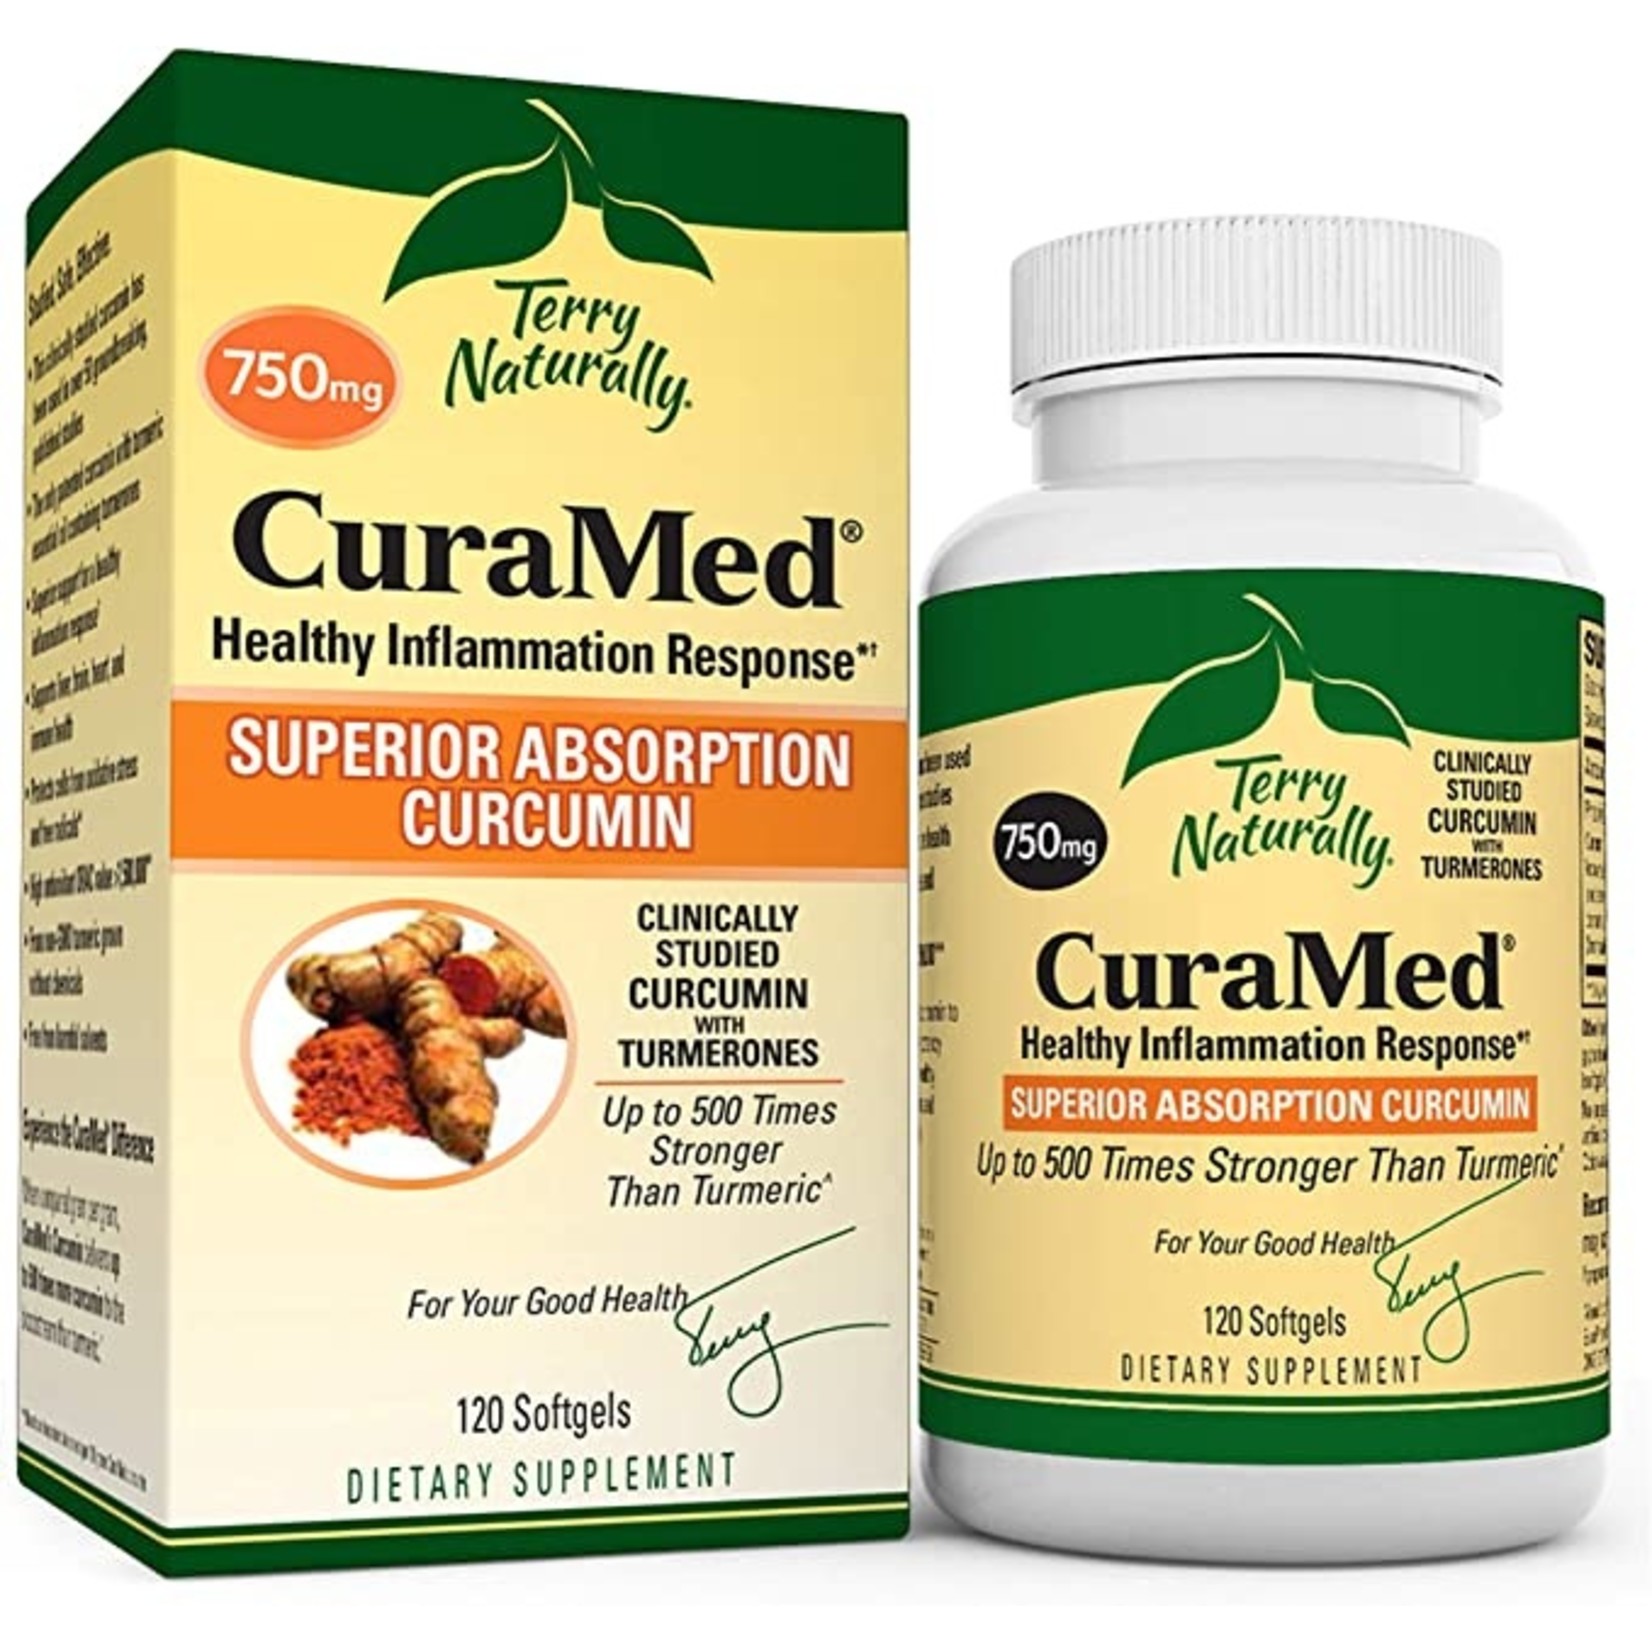 Terry Naturally Terry Naturally - Curamed 750 mg - 120 Softgels